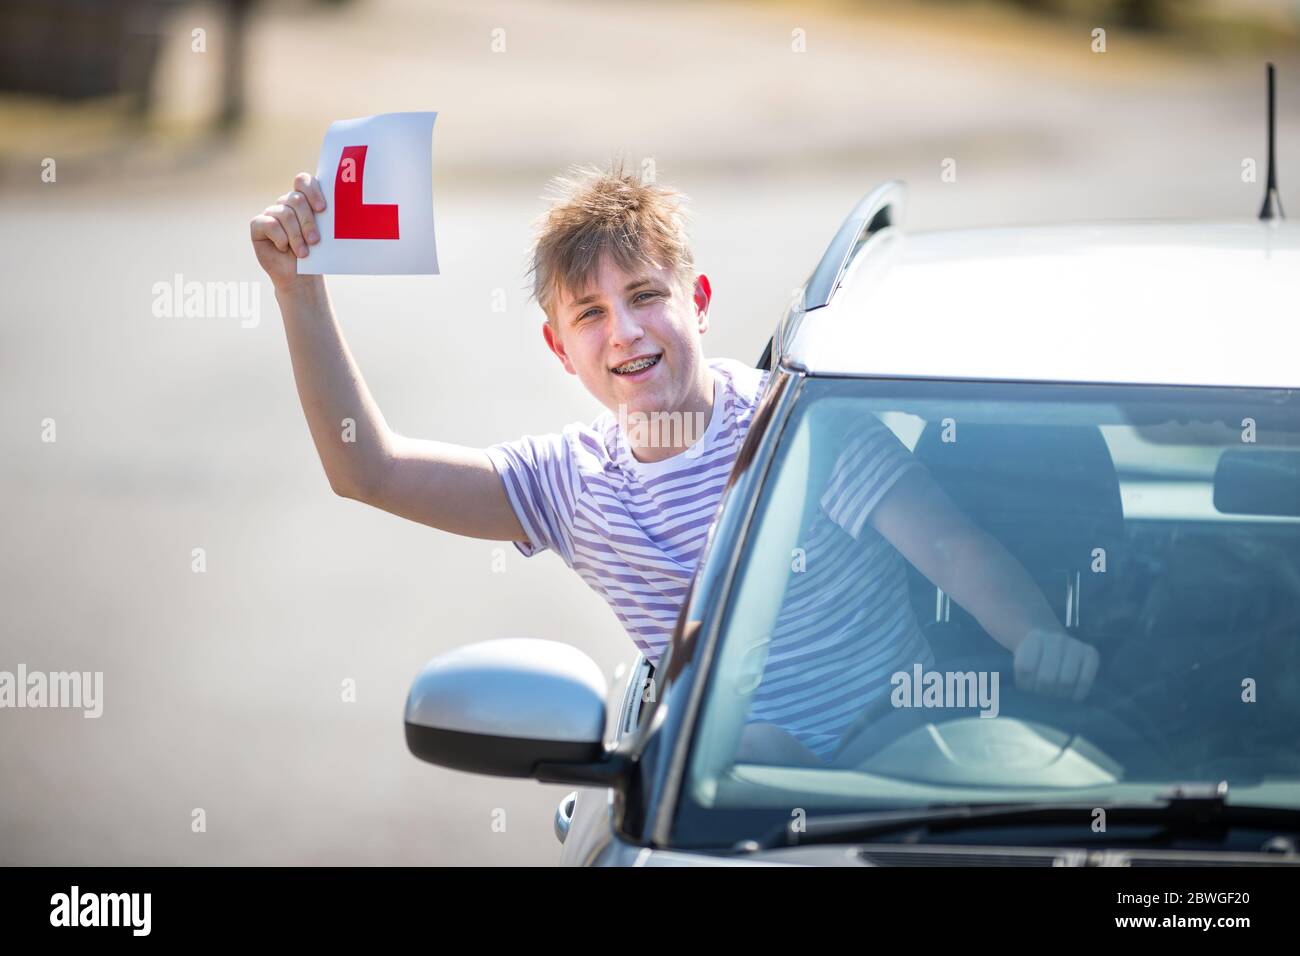 Teenager learner driver celebrating passing his driving test waving his L plates in the air. Stock Photo